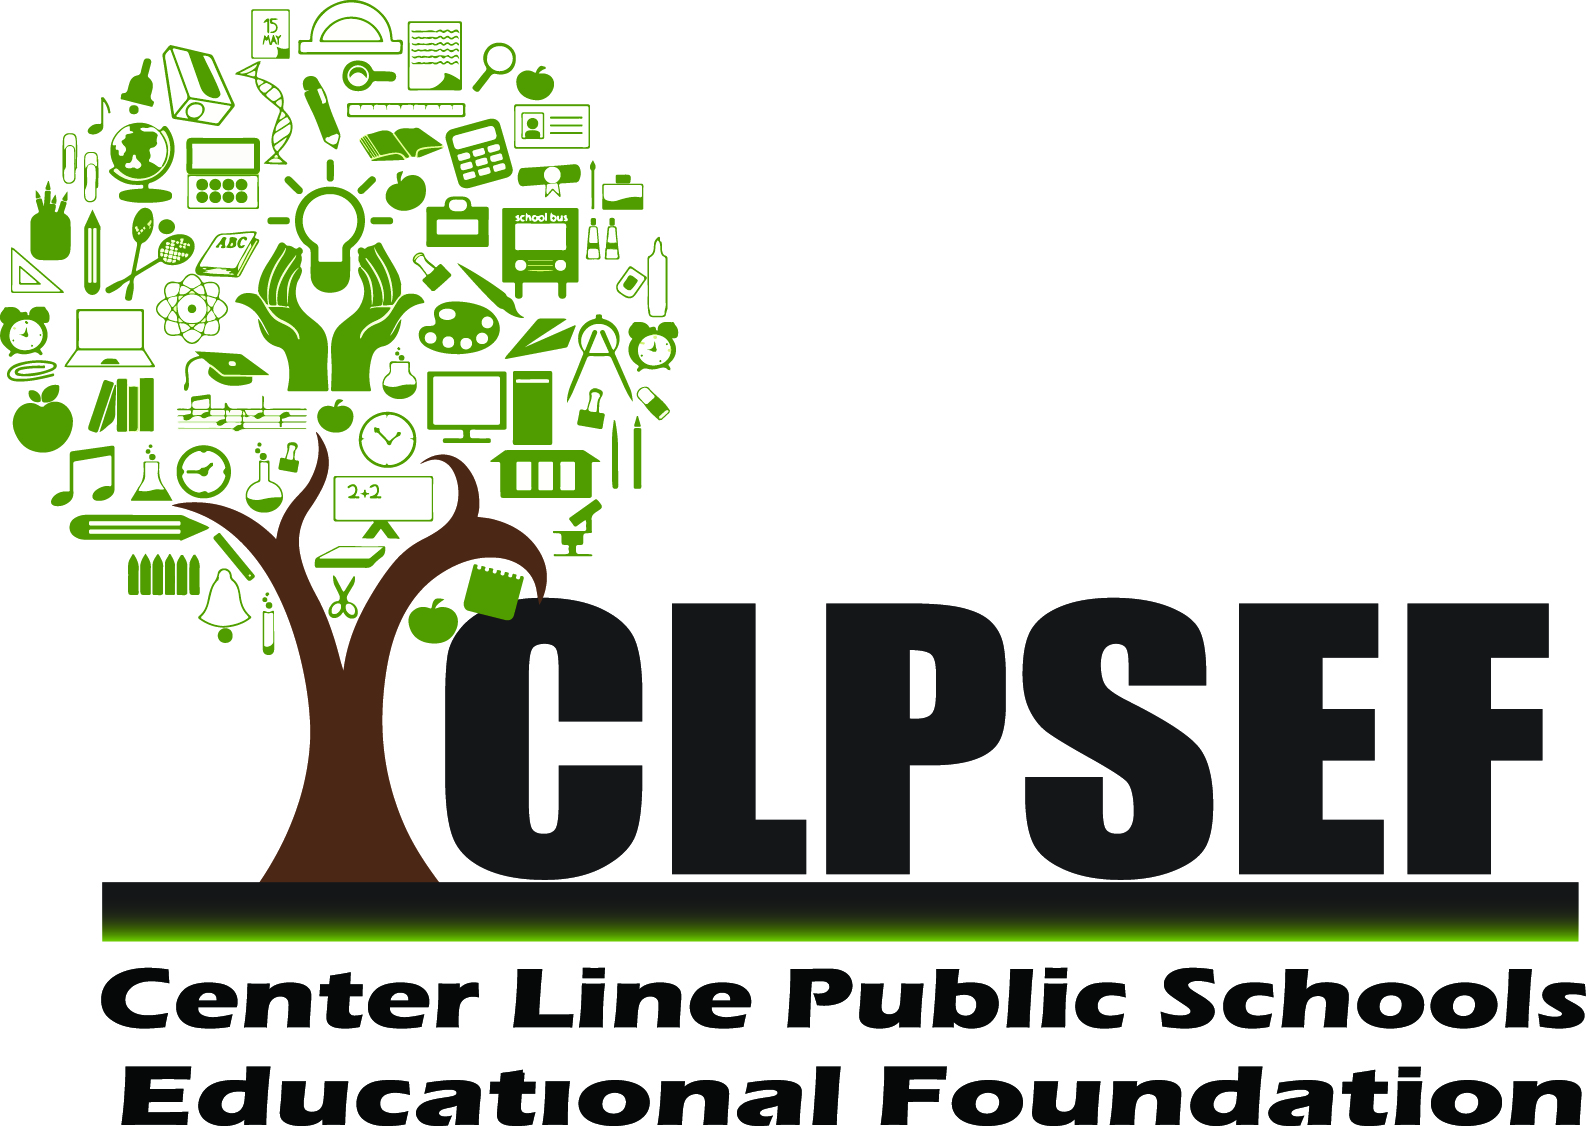 CLPSEF logo including a brown tree with green leaves made of education symbols and the acronym CLPSEF.